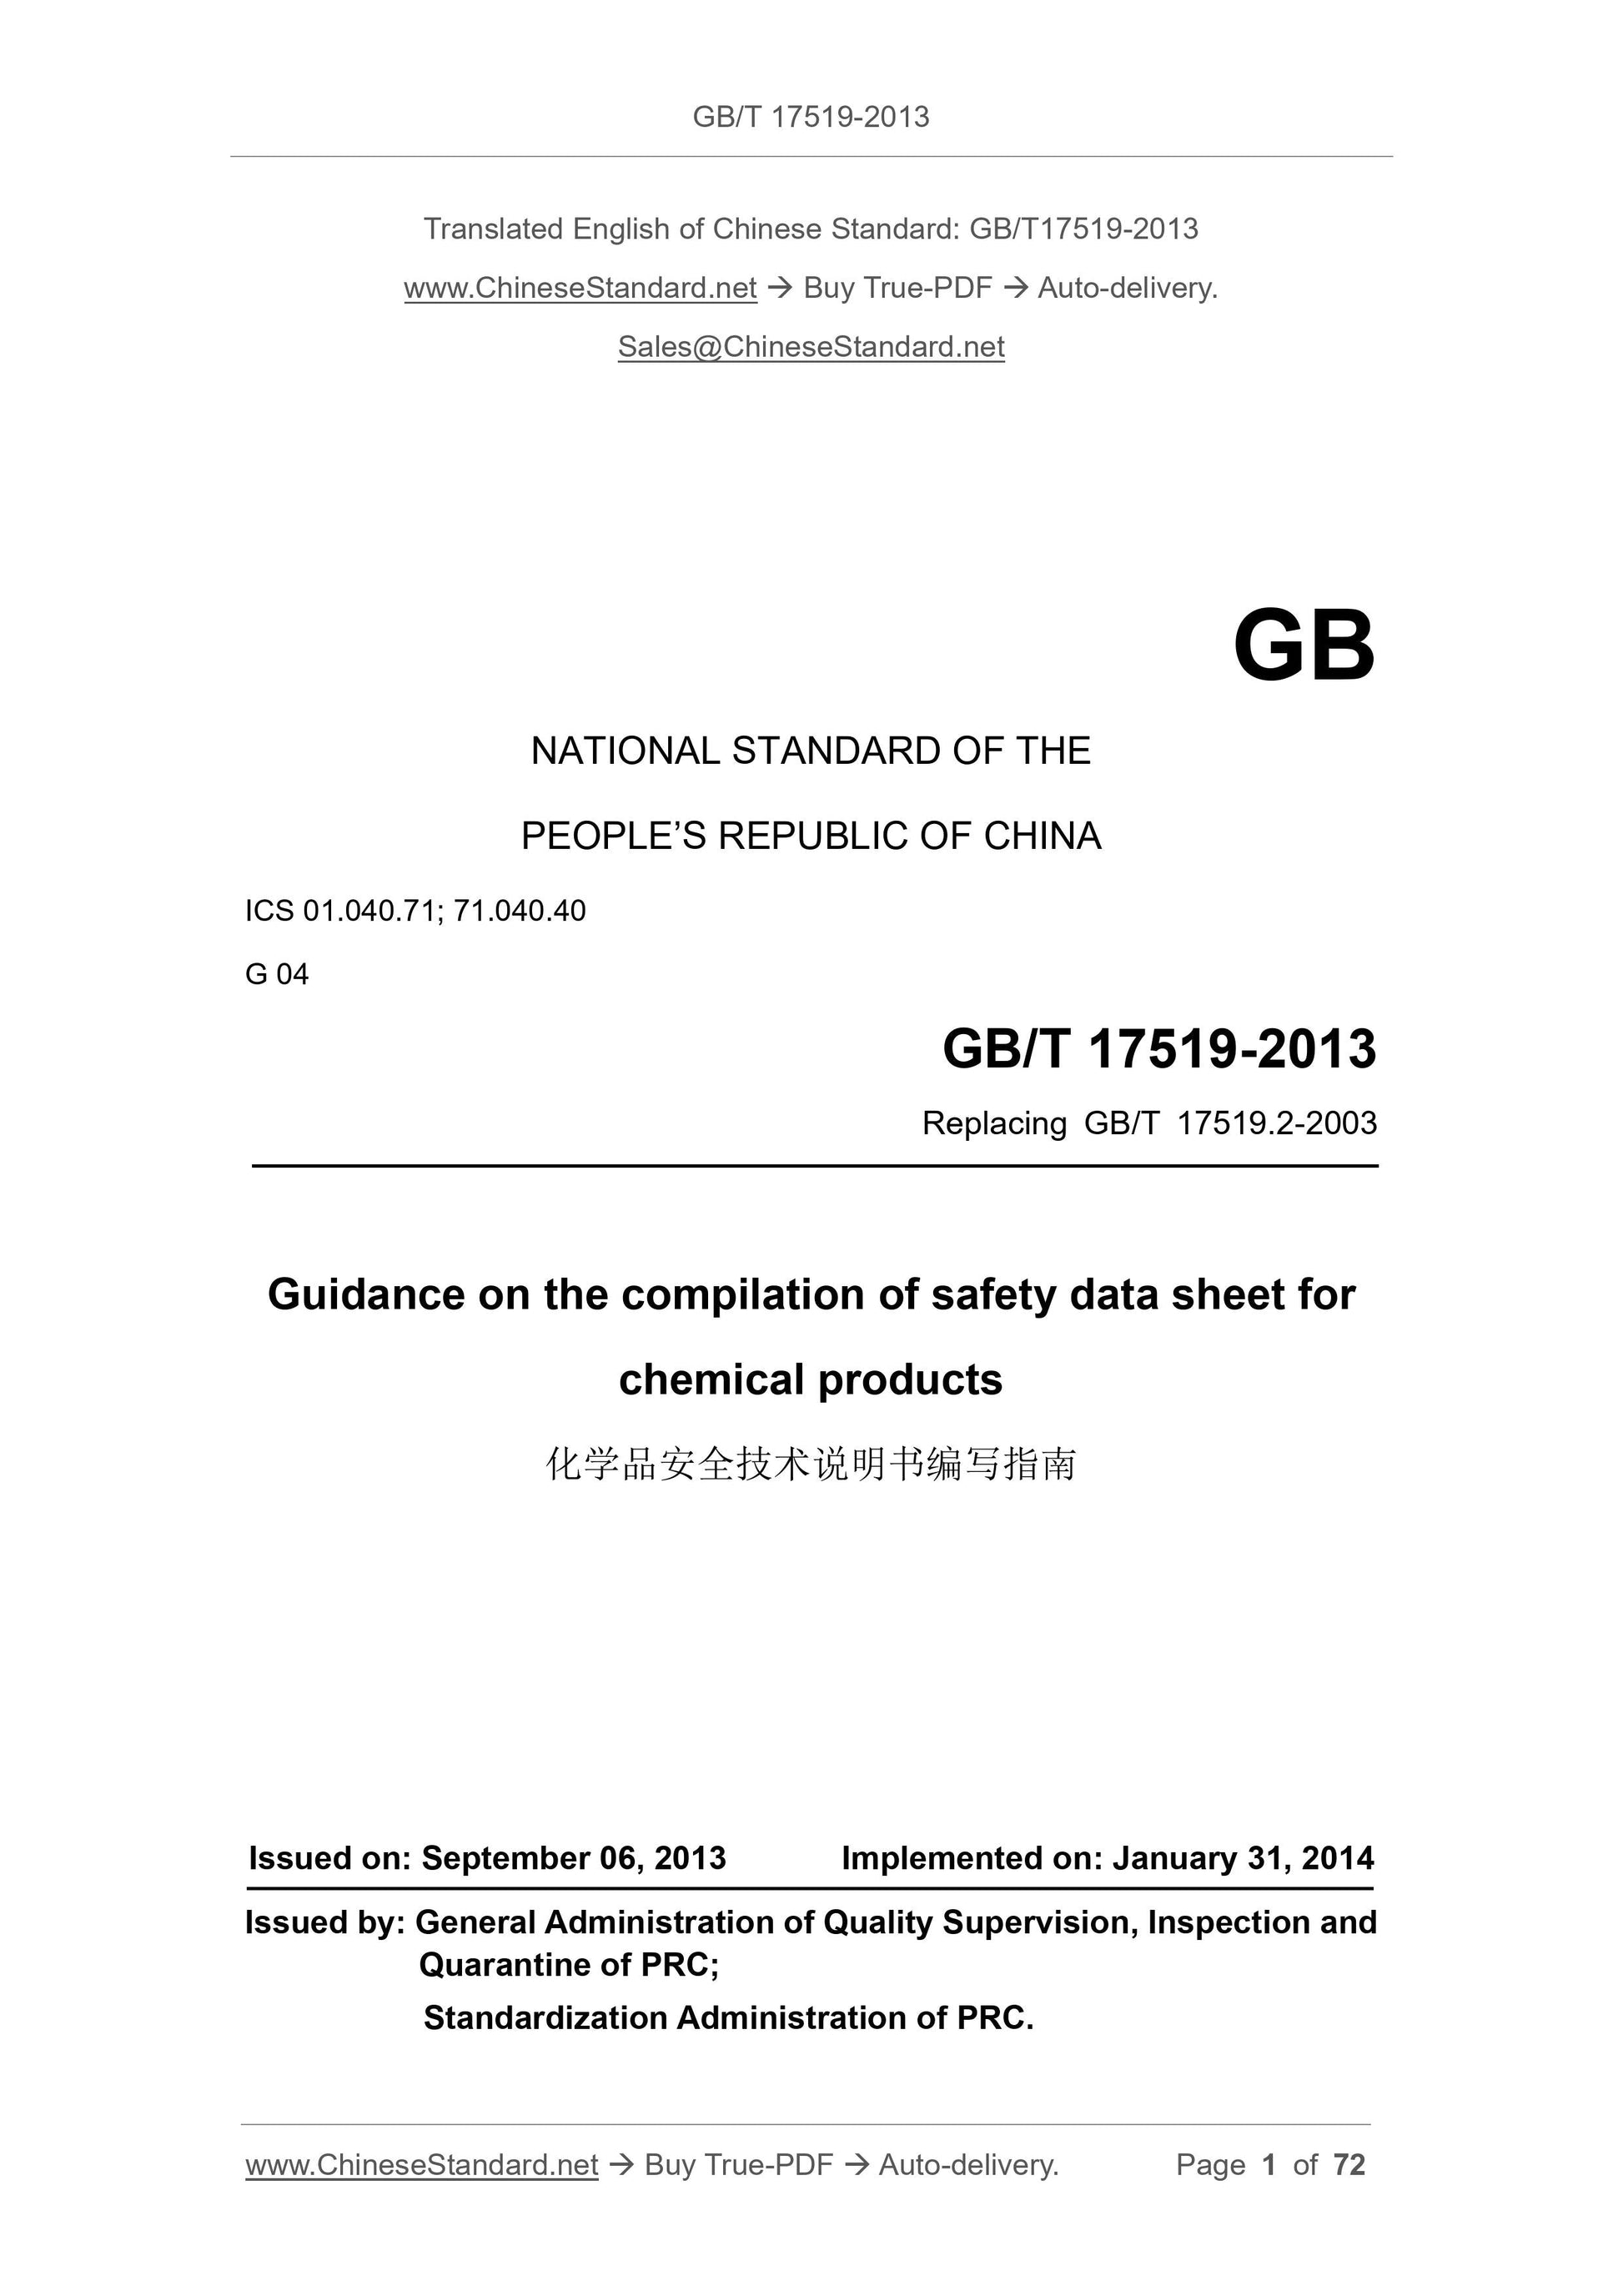 GB/T 17519-2013 Page 1